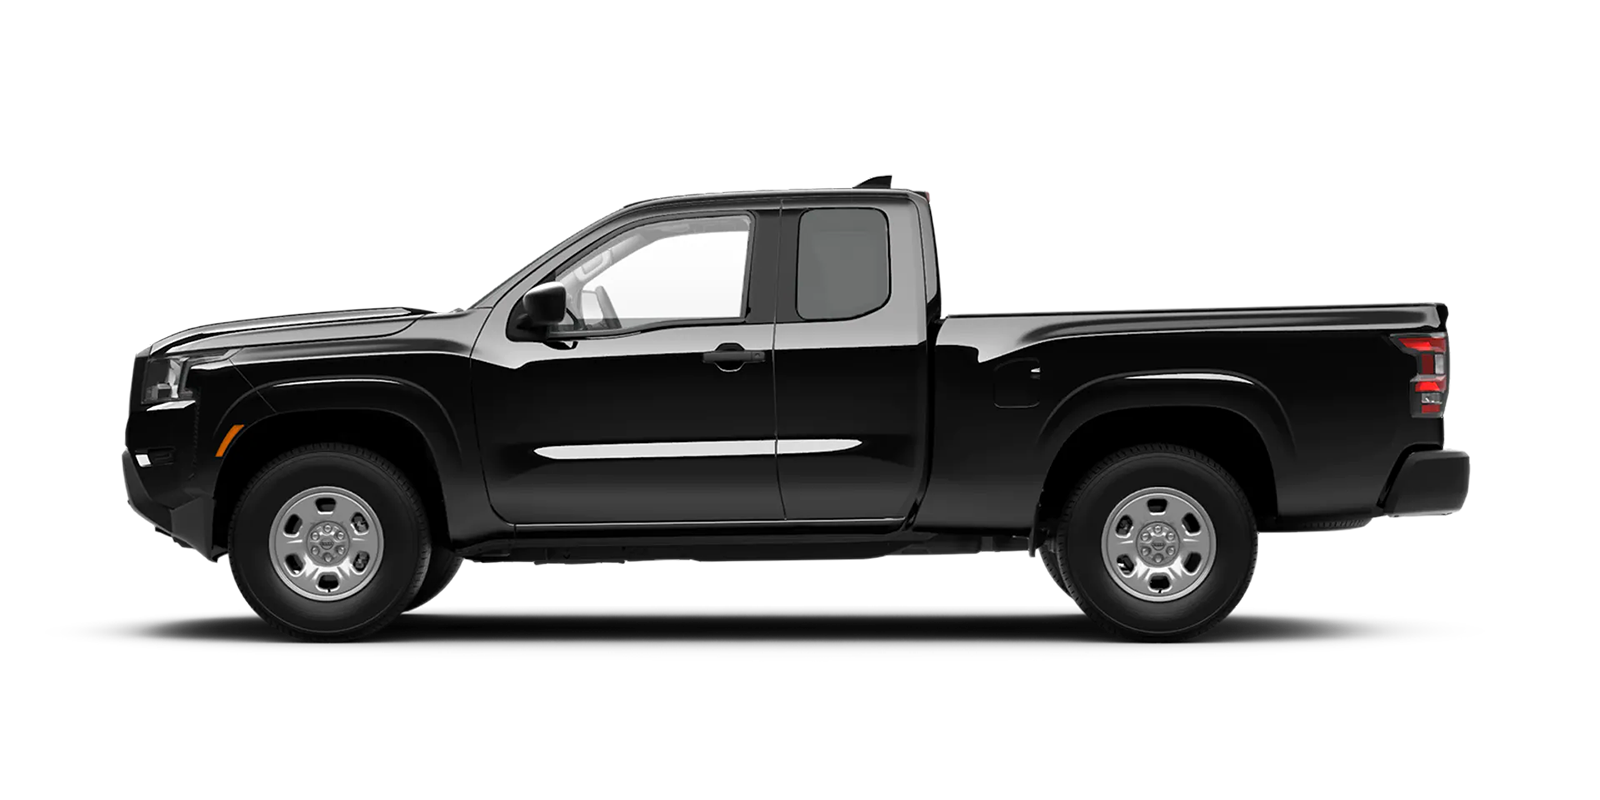 2022 Frontier King Cab S 4x4 in Super Black | Nationwide Nissan in Timonium MD